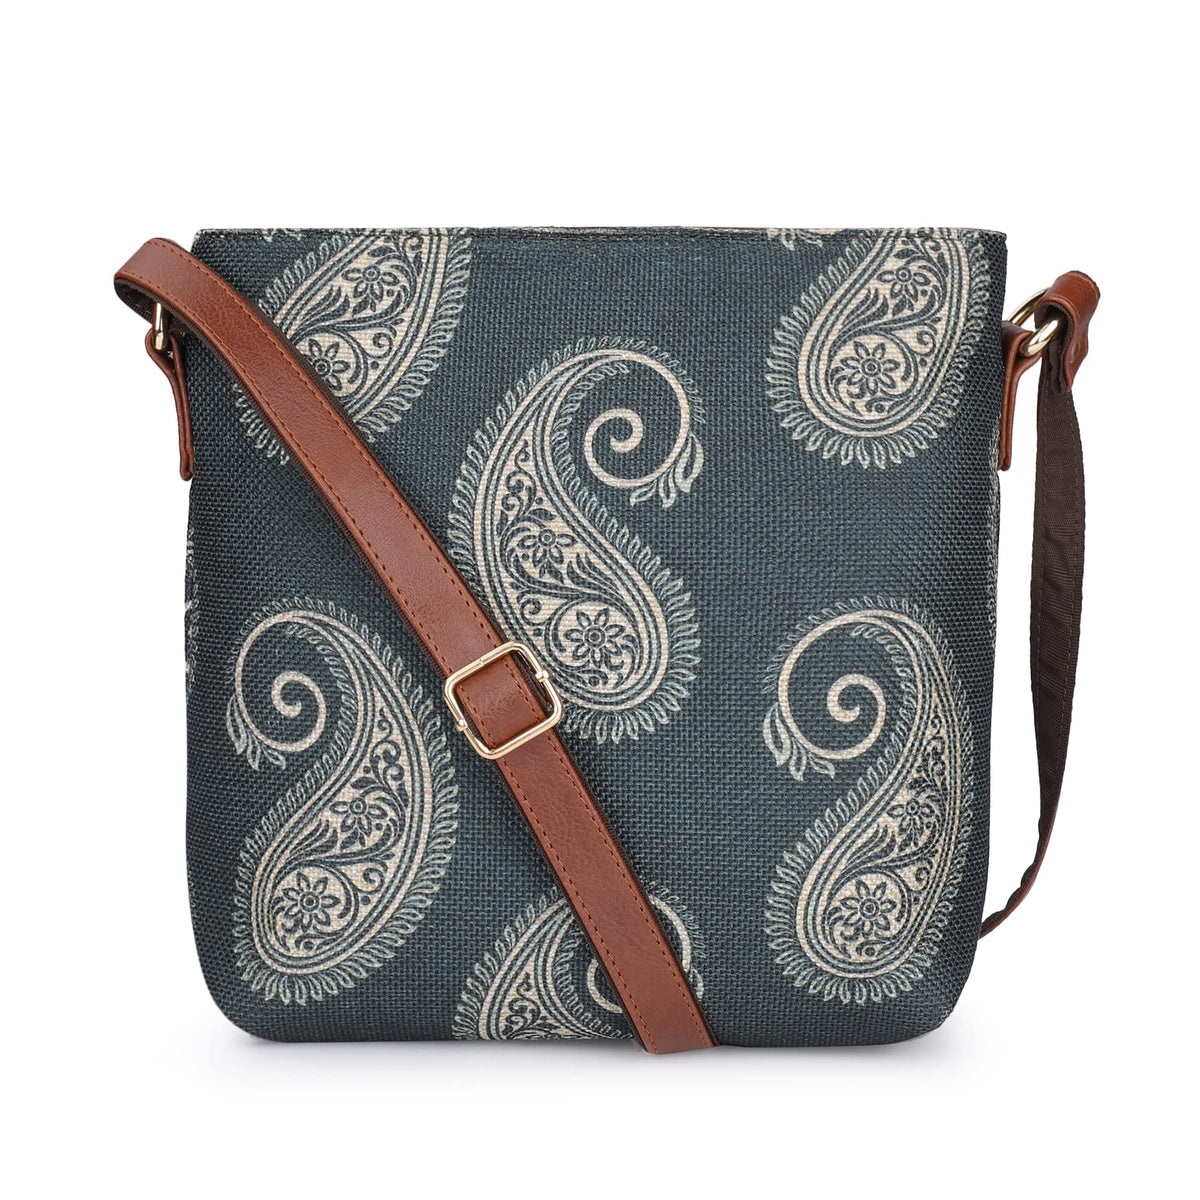 THE CLOWNFISH Aahna Polyester Crossbody Sling bag for Women Casual Party Bag Purse with Adjustable Shoulder Strap and Printed Design for Ladies College Girls (Ash Grey)